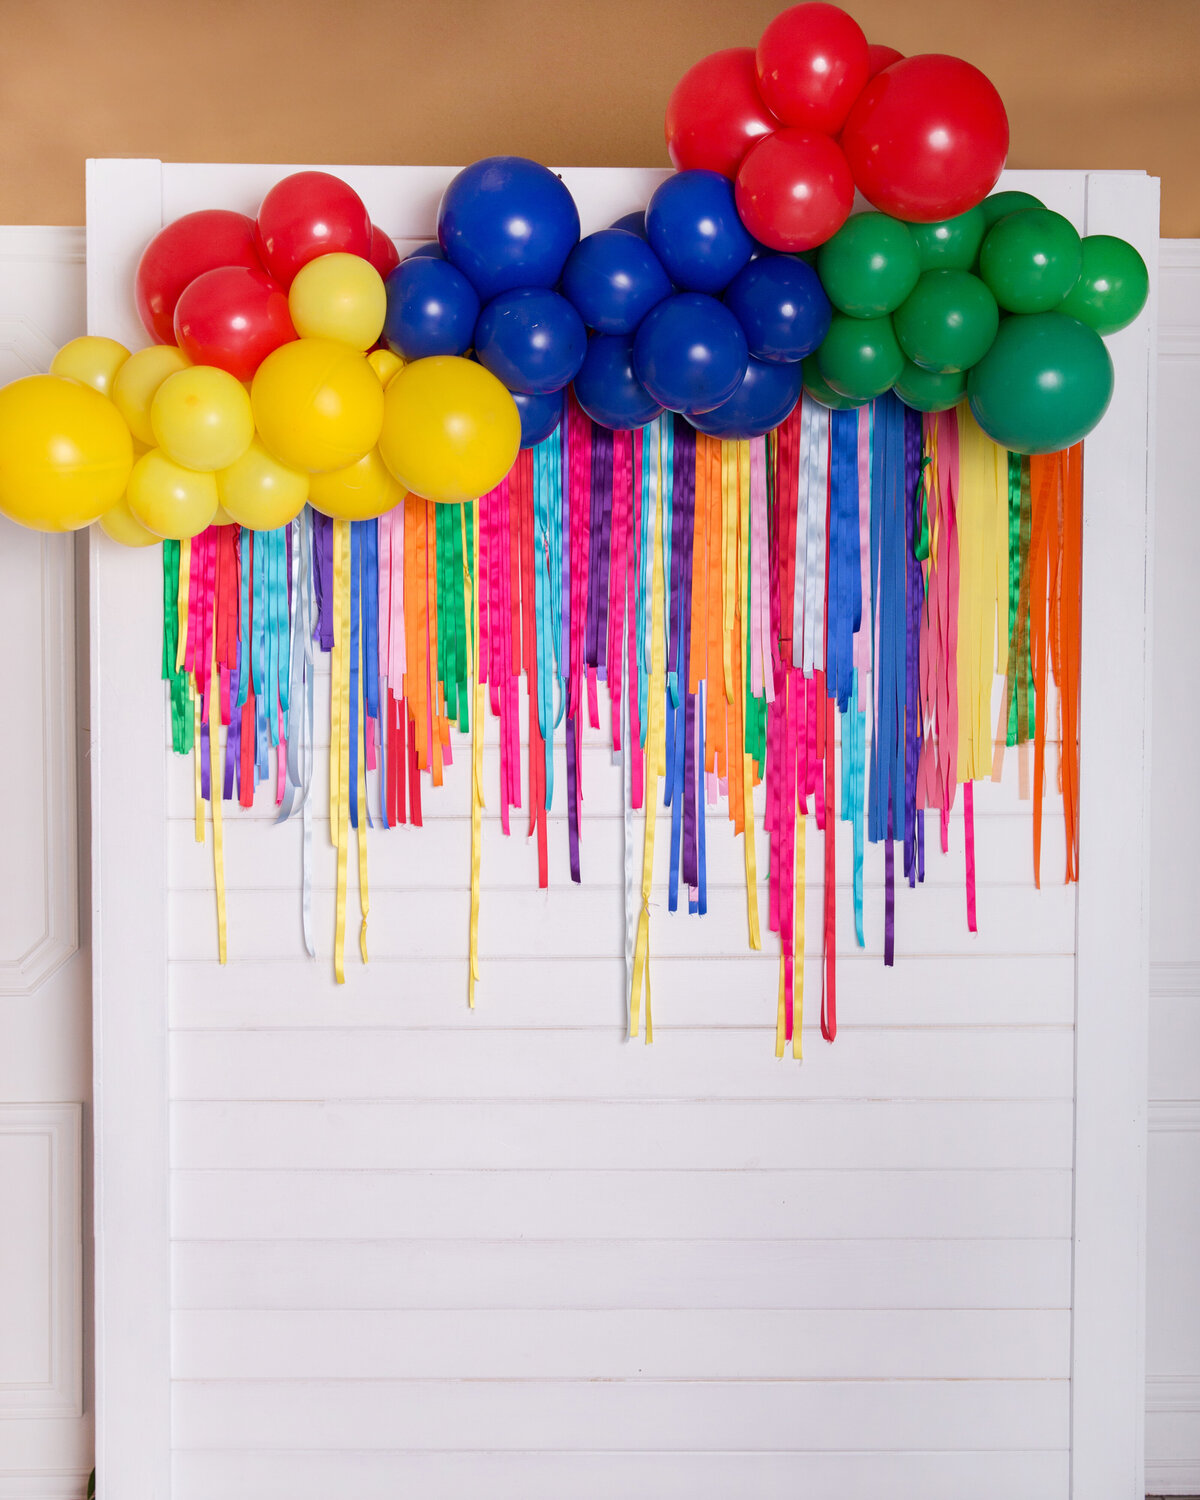 Primary colored balloons and streamers on a white backdrop display